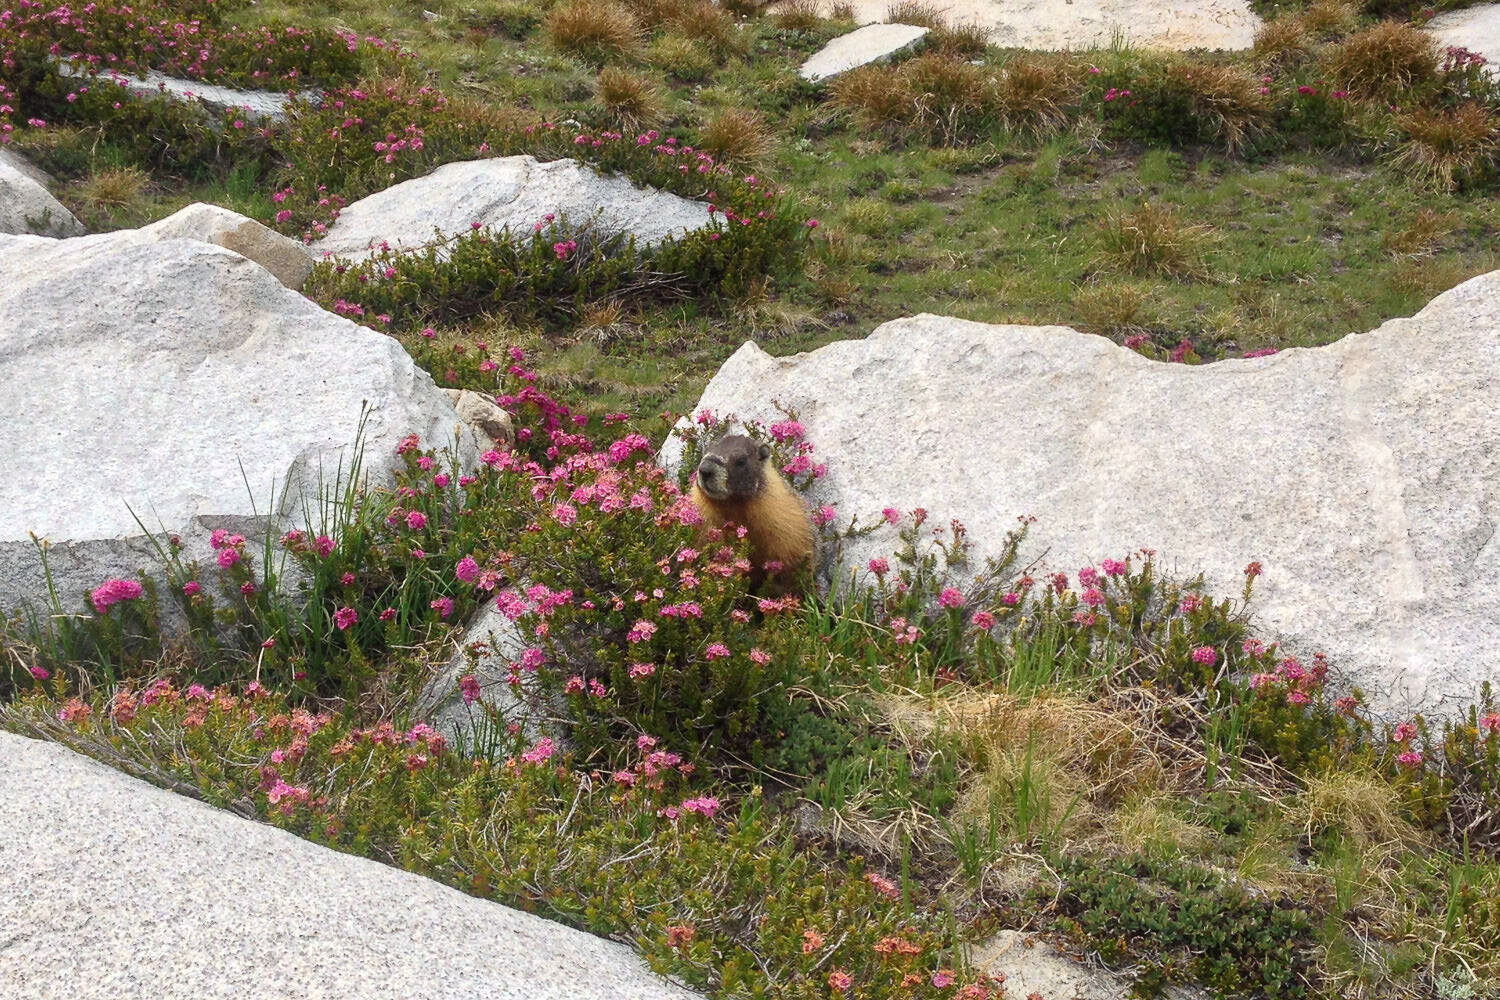 A marmot waits for the perfect moment to steal tortillas from a distracted hiker